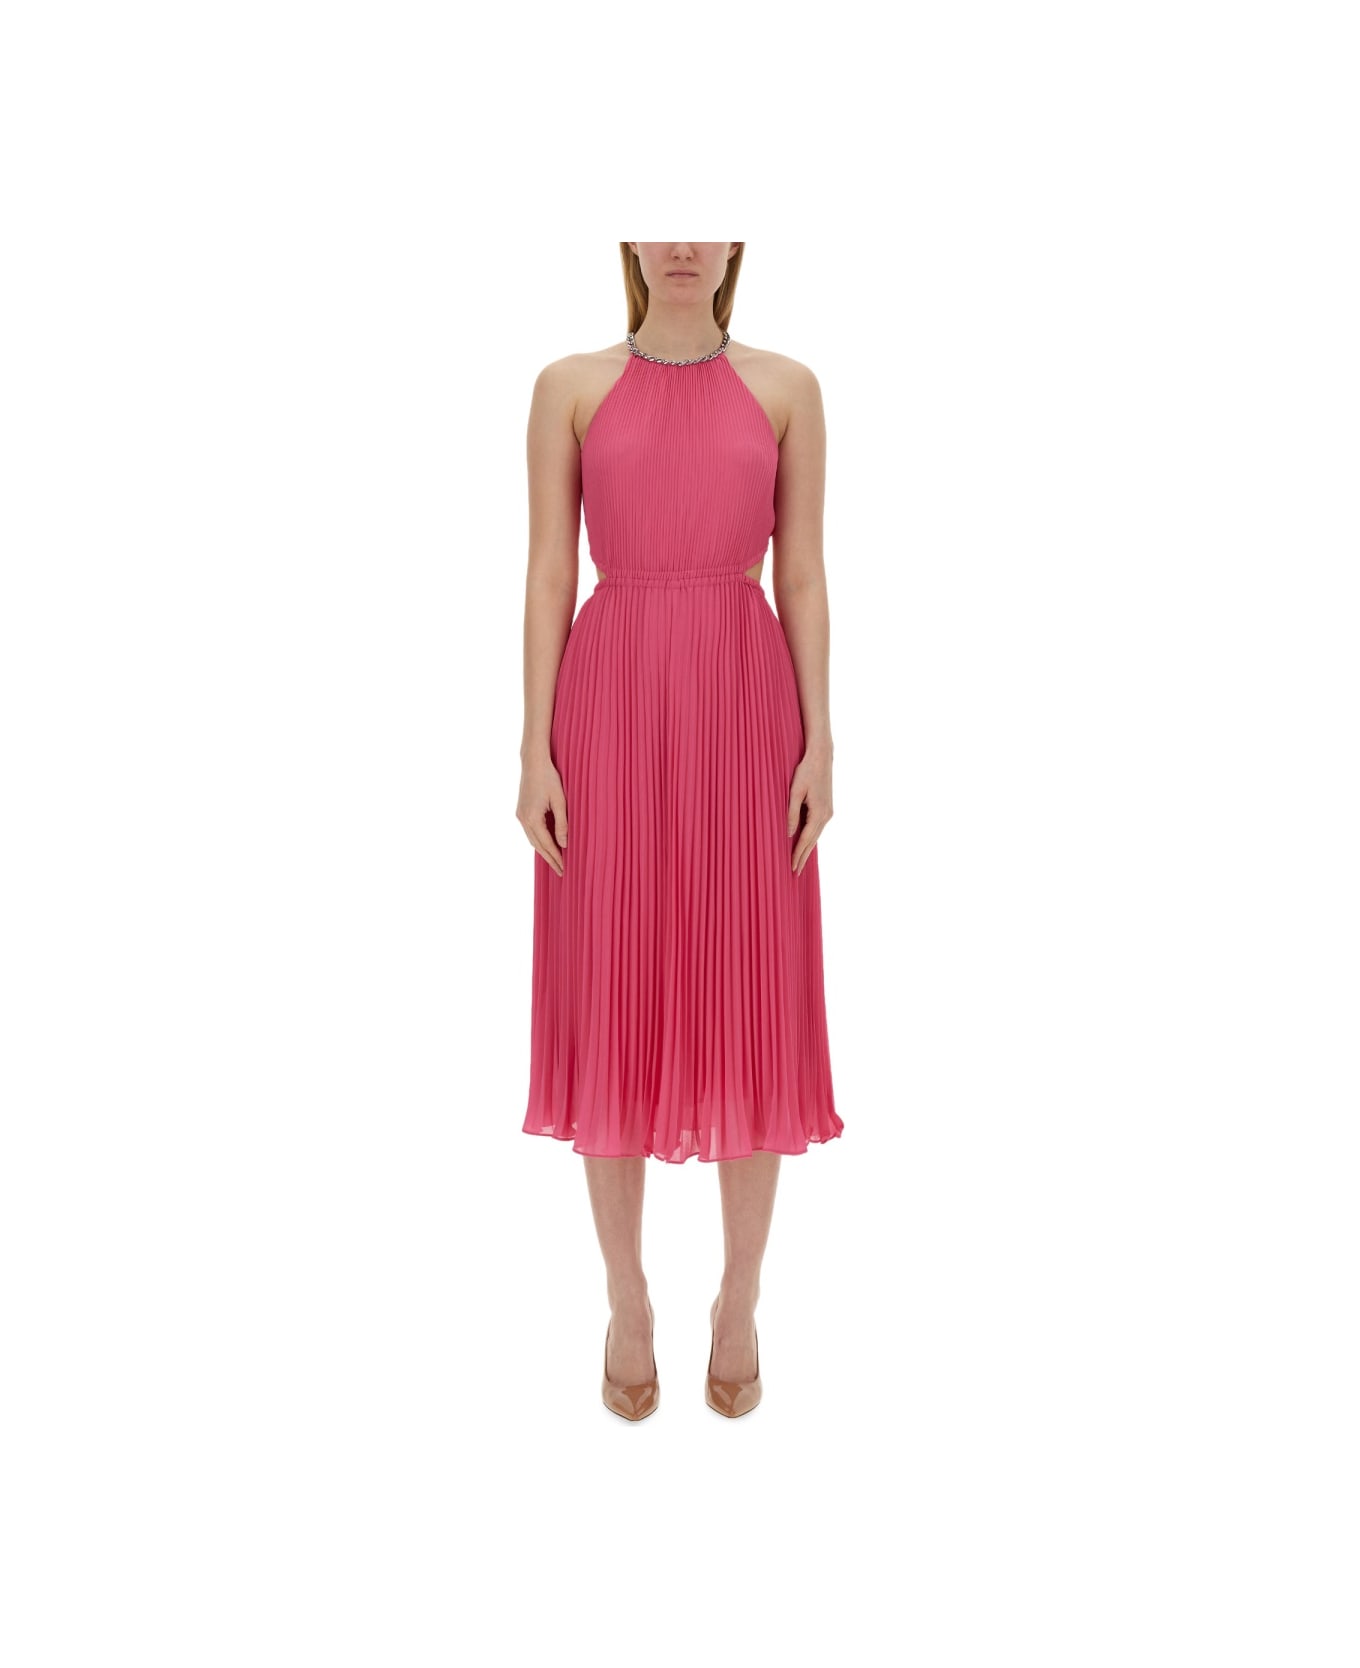 Michael Kors Pleated Georgette Dress With Cut-out Details - PINK